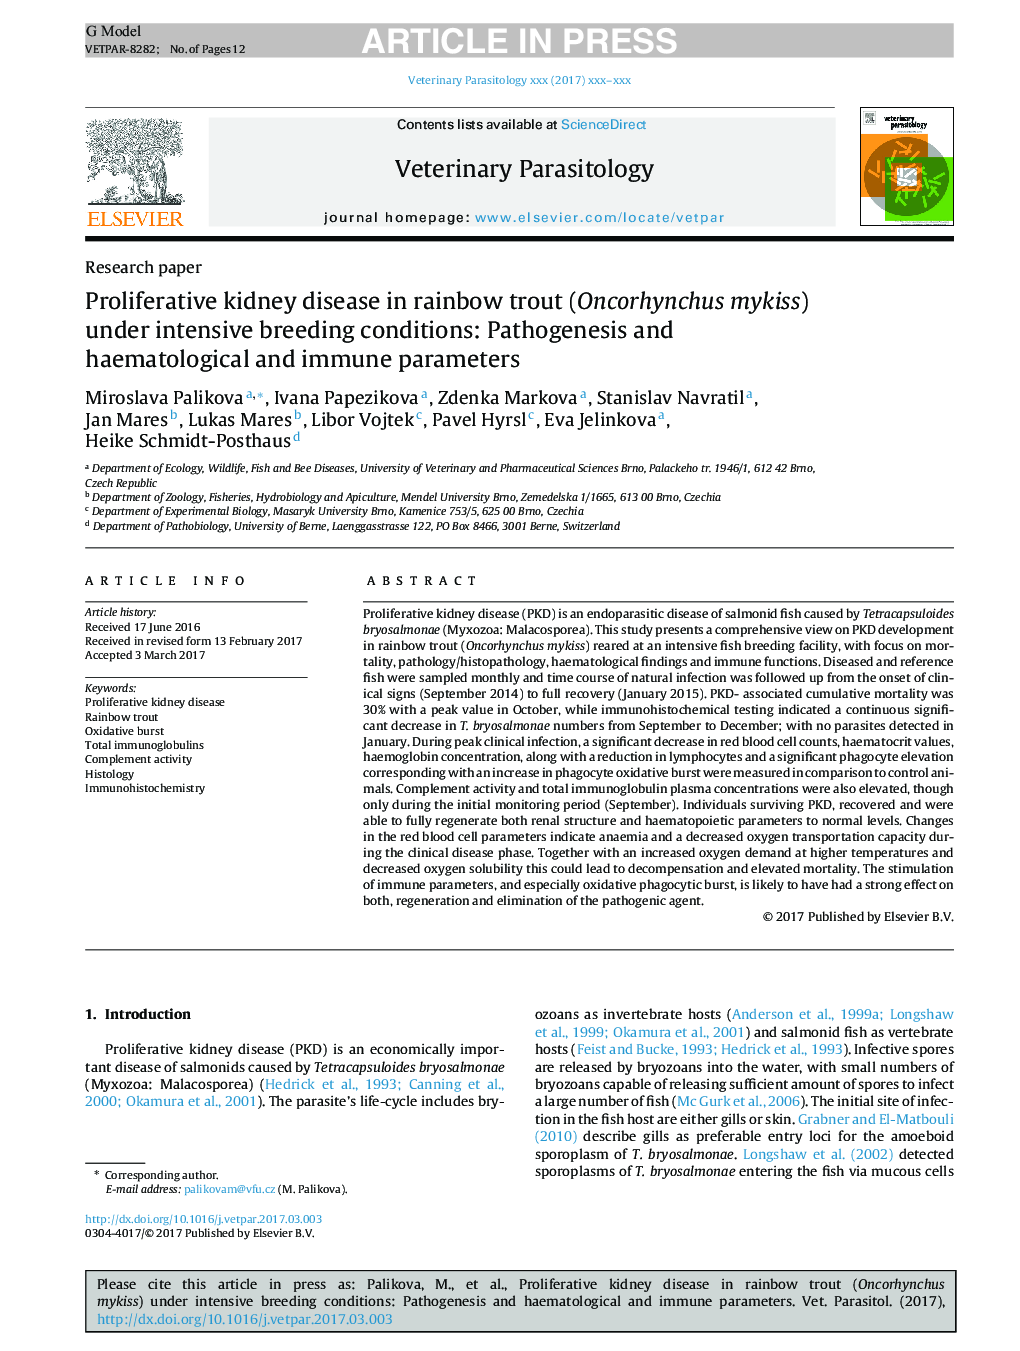 Proliferative kidney disease in rainbow trout (Oncorhynchus mykiss) under intensive breeding conditions: Pathogenesis and haematological and immune parameters